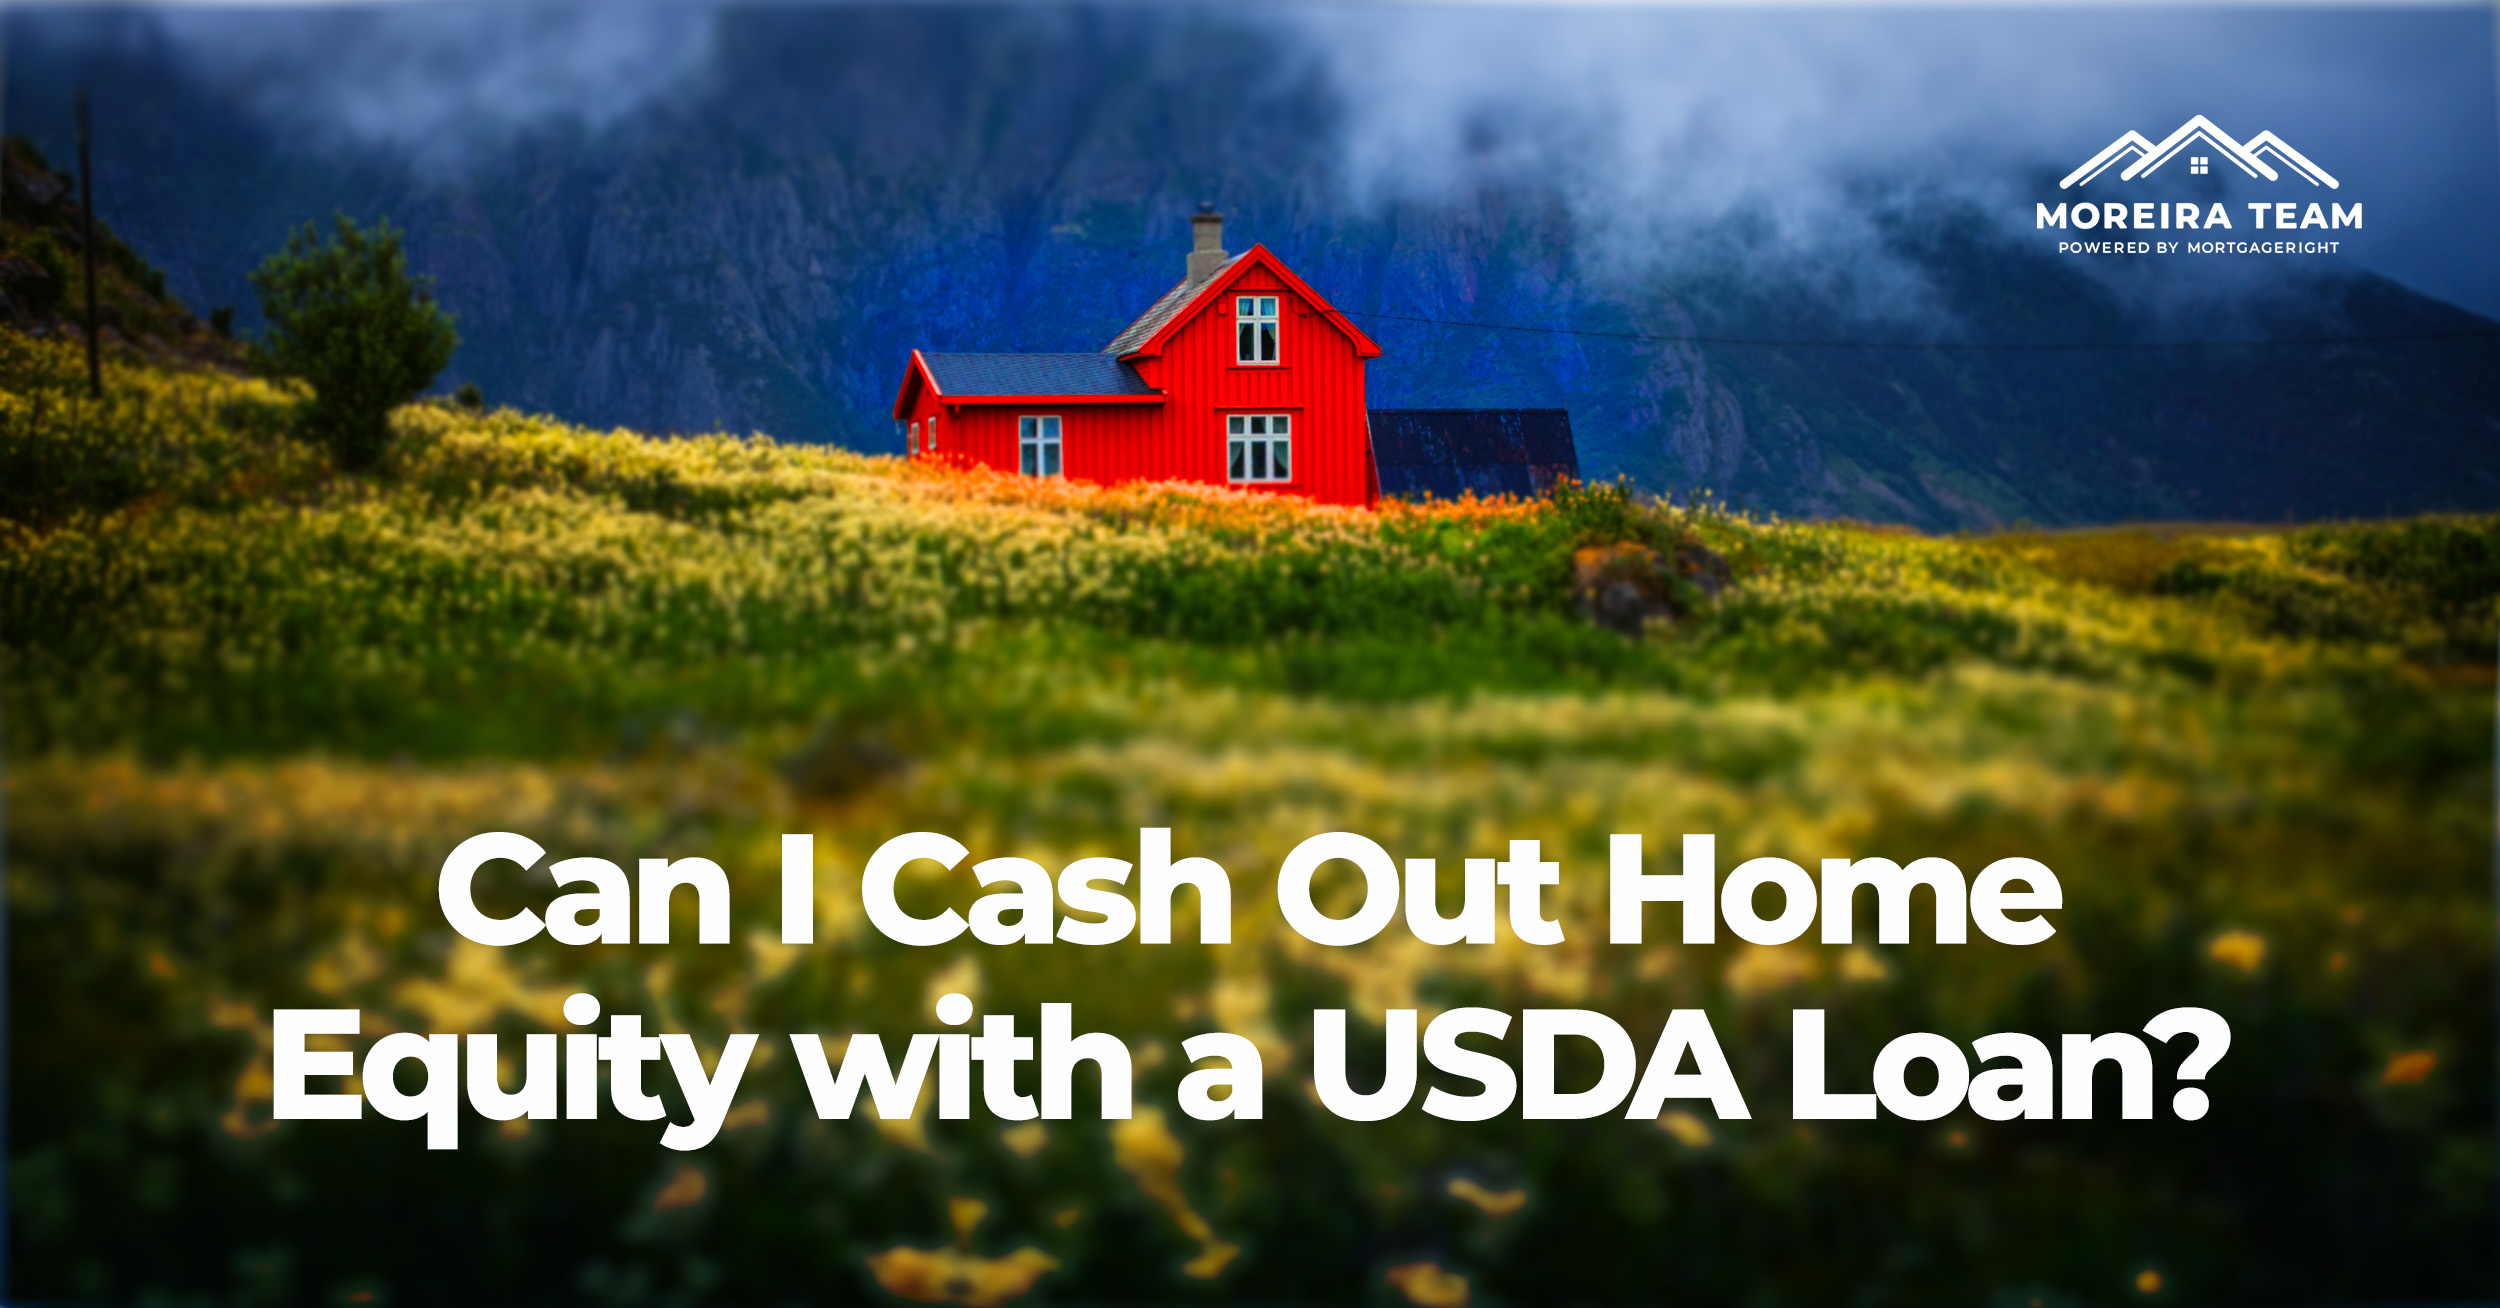 Can I Cash Out Home Equity with a USDA Loan?